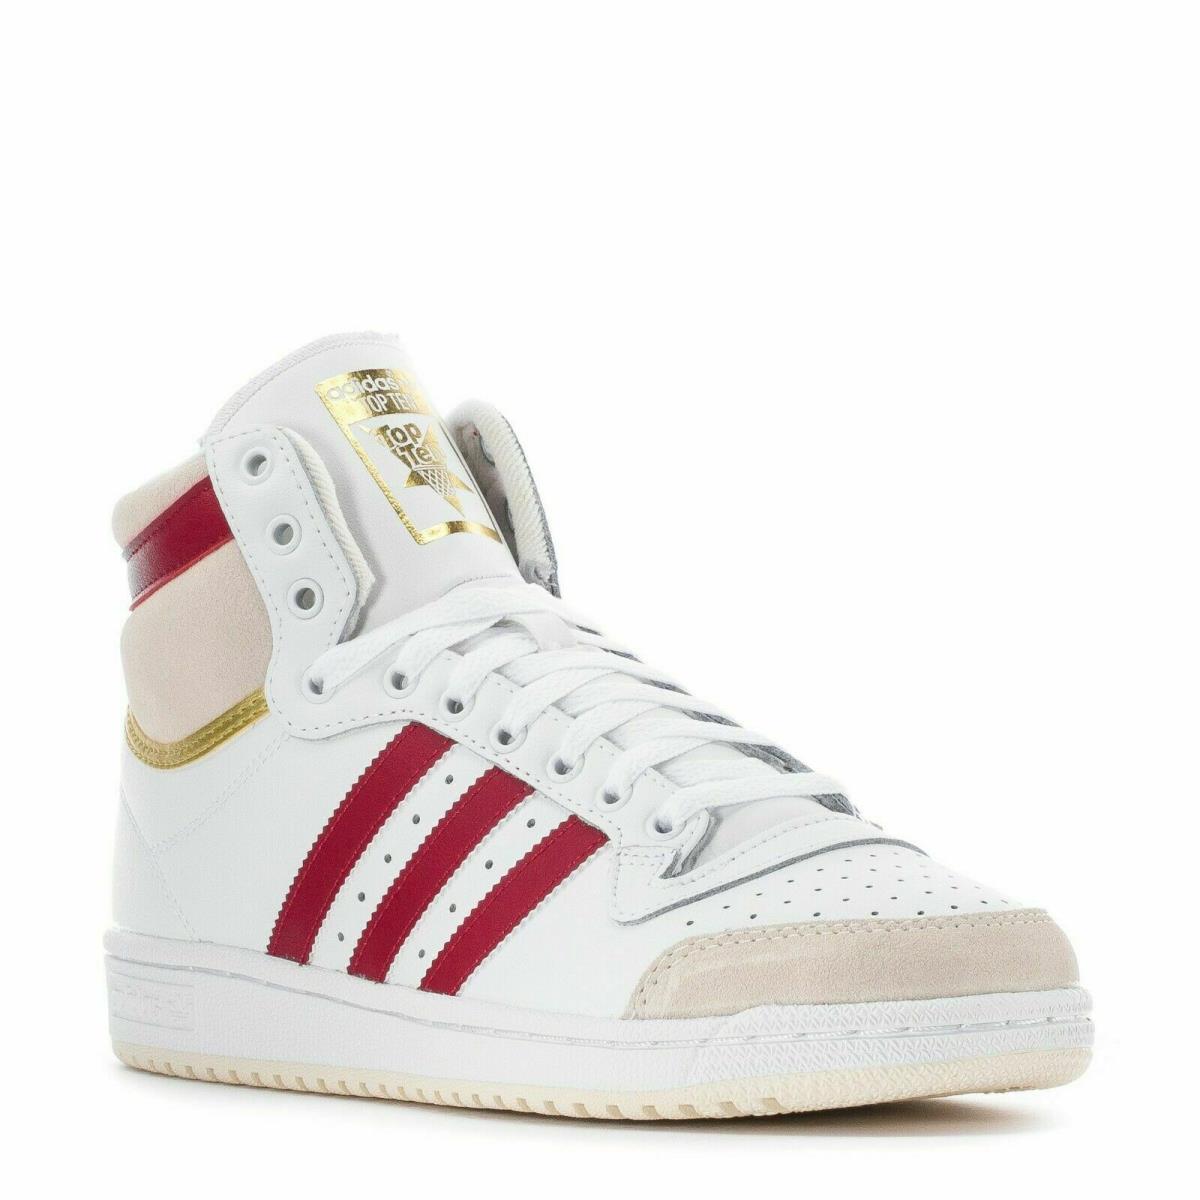 Adidas Top Ten White Red Cream Shoes Sneakers S24133 - Size 11.5 Mens